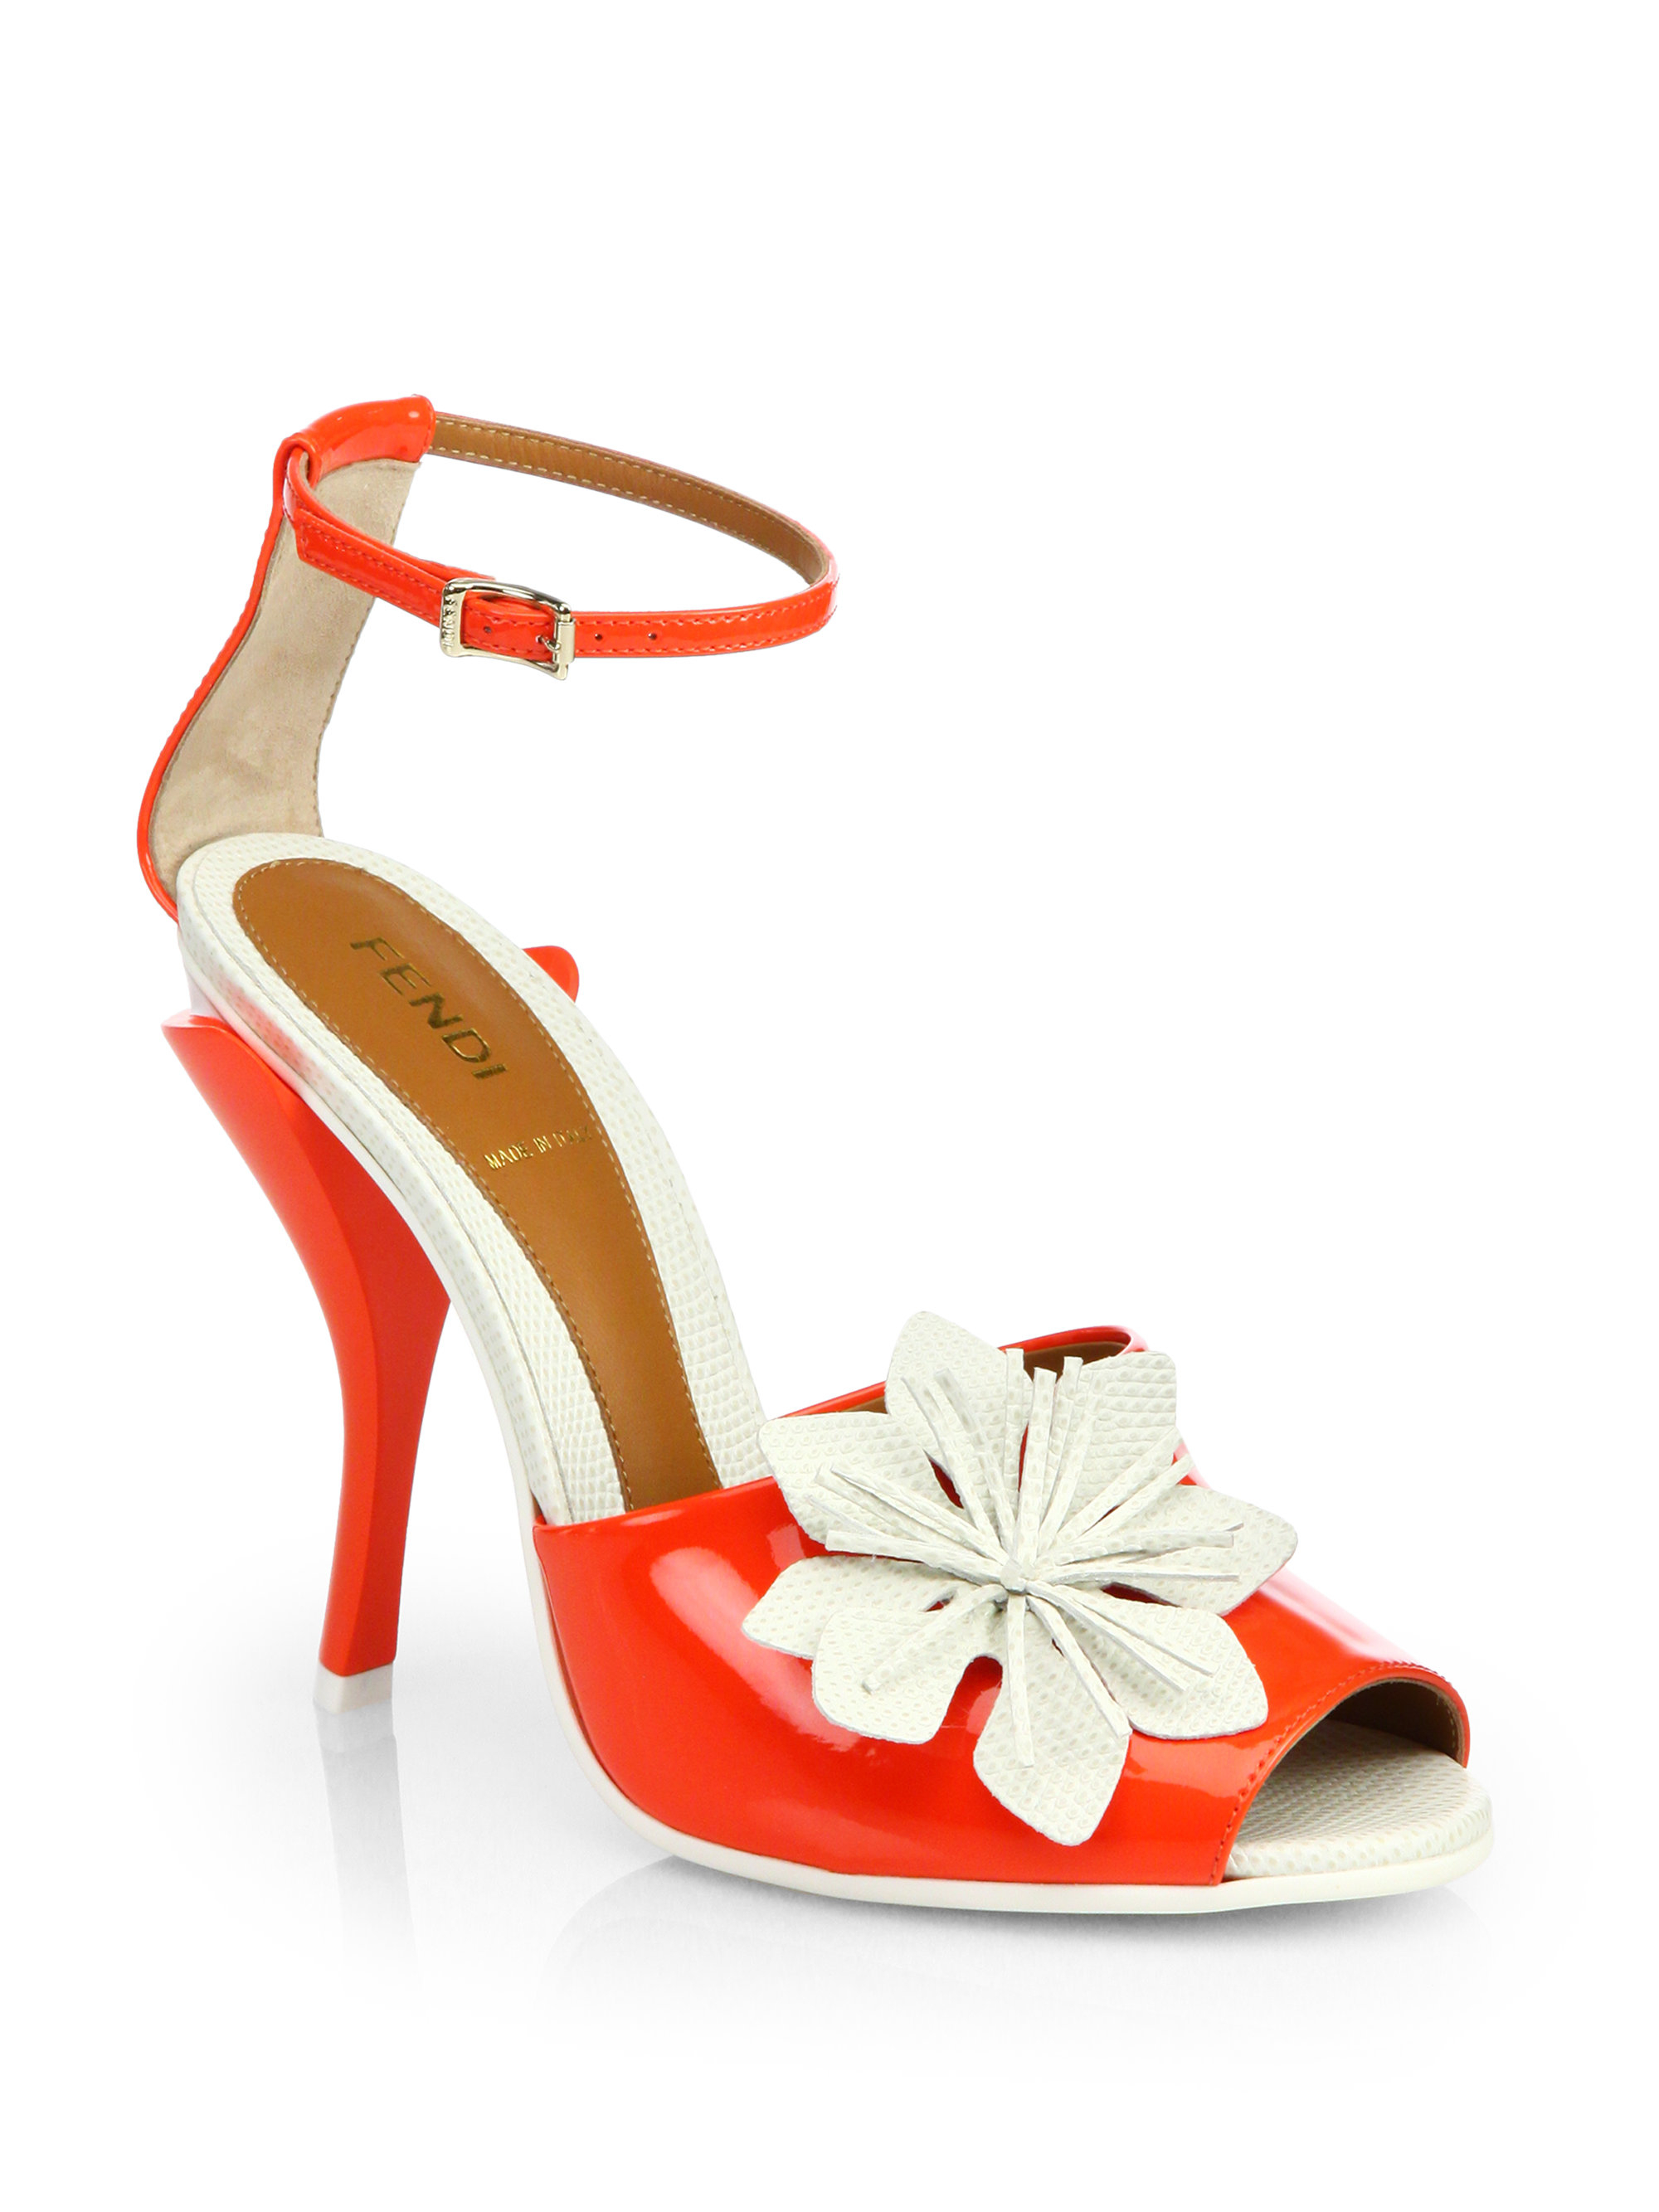 Fendi Jungle Patent Leather Anklestrap Sandals in Red (RED POPPY) | Lyst